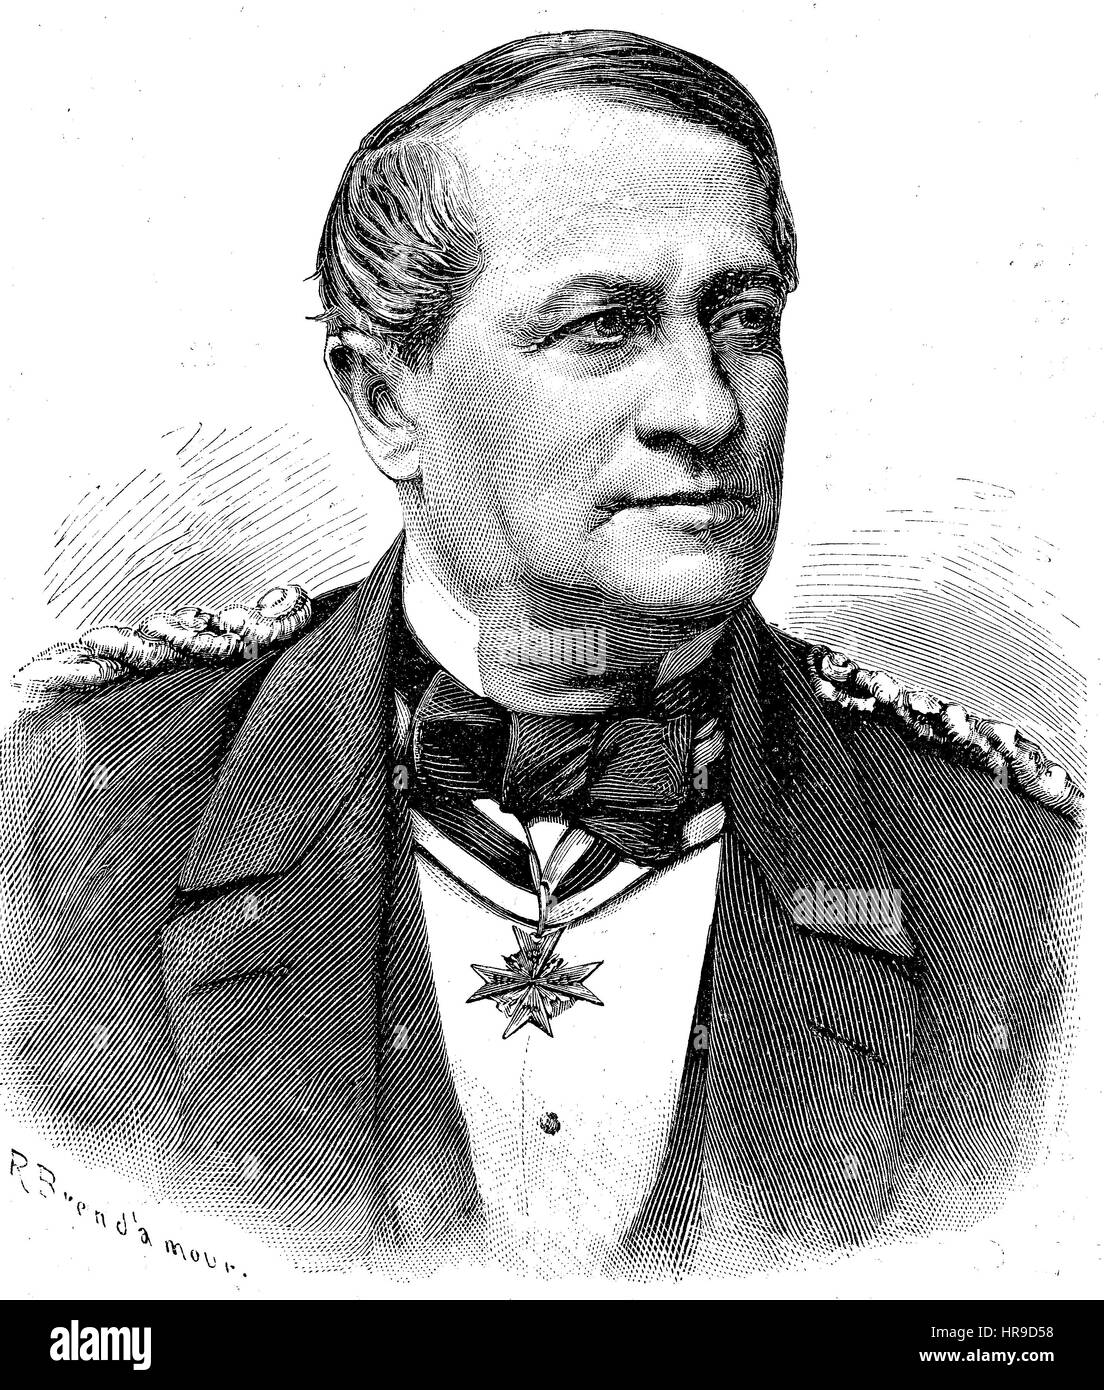 Prince Adalbert of Prussia, Heinrich Wilhelm Adalbert, 1811 - 1873, was a son of Prince Wilhelm of Prussia and Landgravine Marie Anna of Hesse-Homburg. He was a naval theorist and admiral. He was instrumental during the Revolutions of 1848 in founding the first unified German fleet, the Reichsflotte, Situation from the time of The Franco-Prussian War or Franco-German War,  Deutsch-Franzoesischer Krieg, 1870-1871, Reproduction of an original woodcut from the year 1885, digital improved Stock Photo